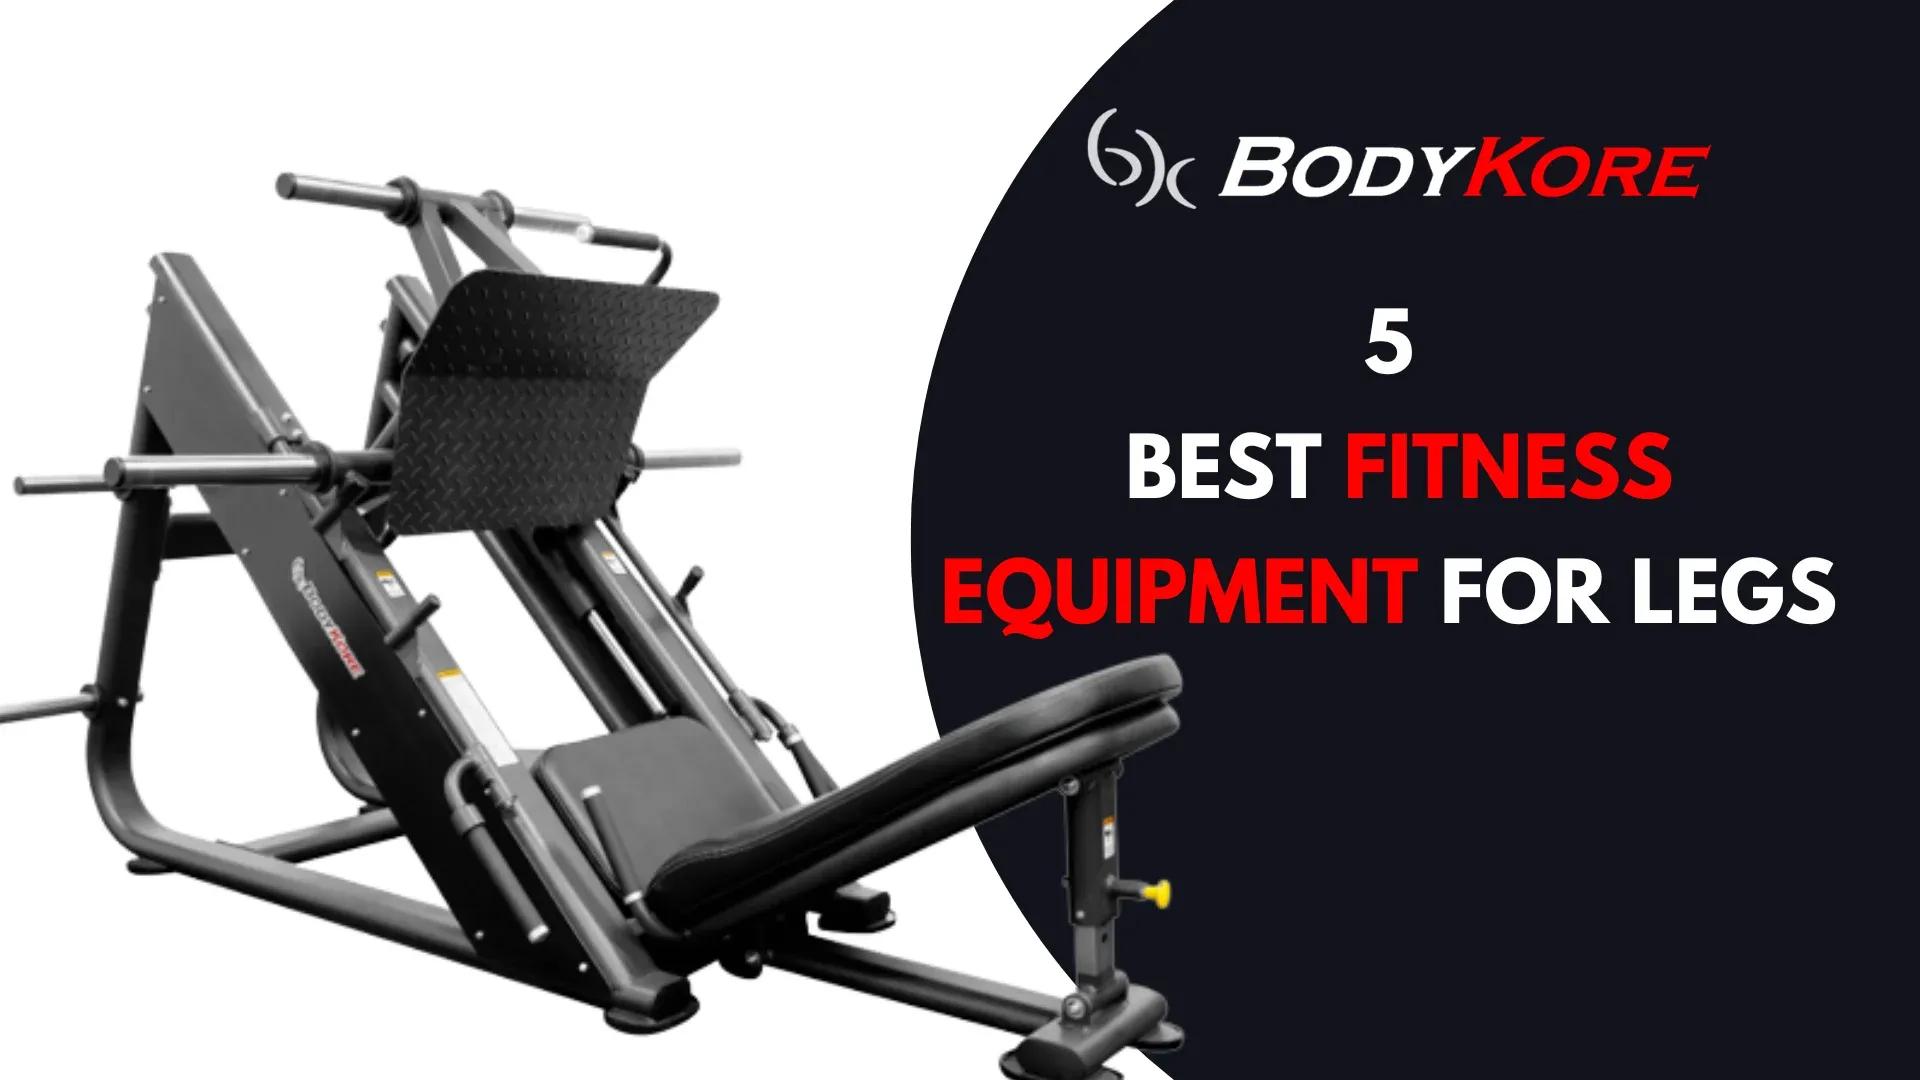 5 Best Fitness Equipment for Legs by Bodykore